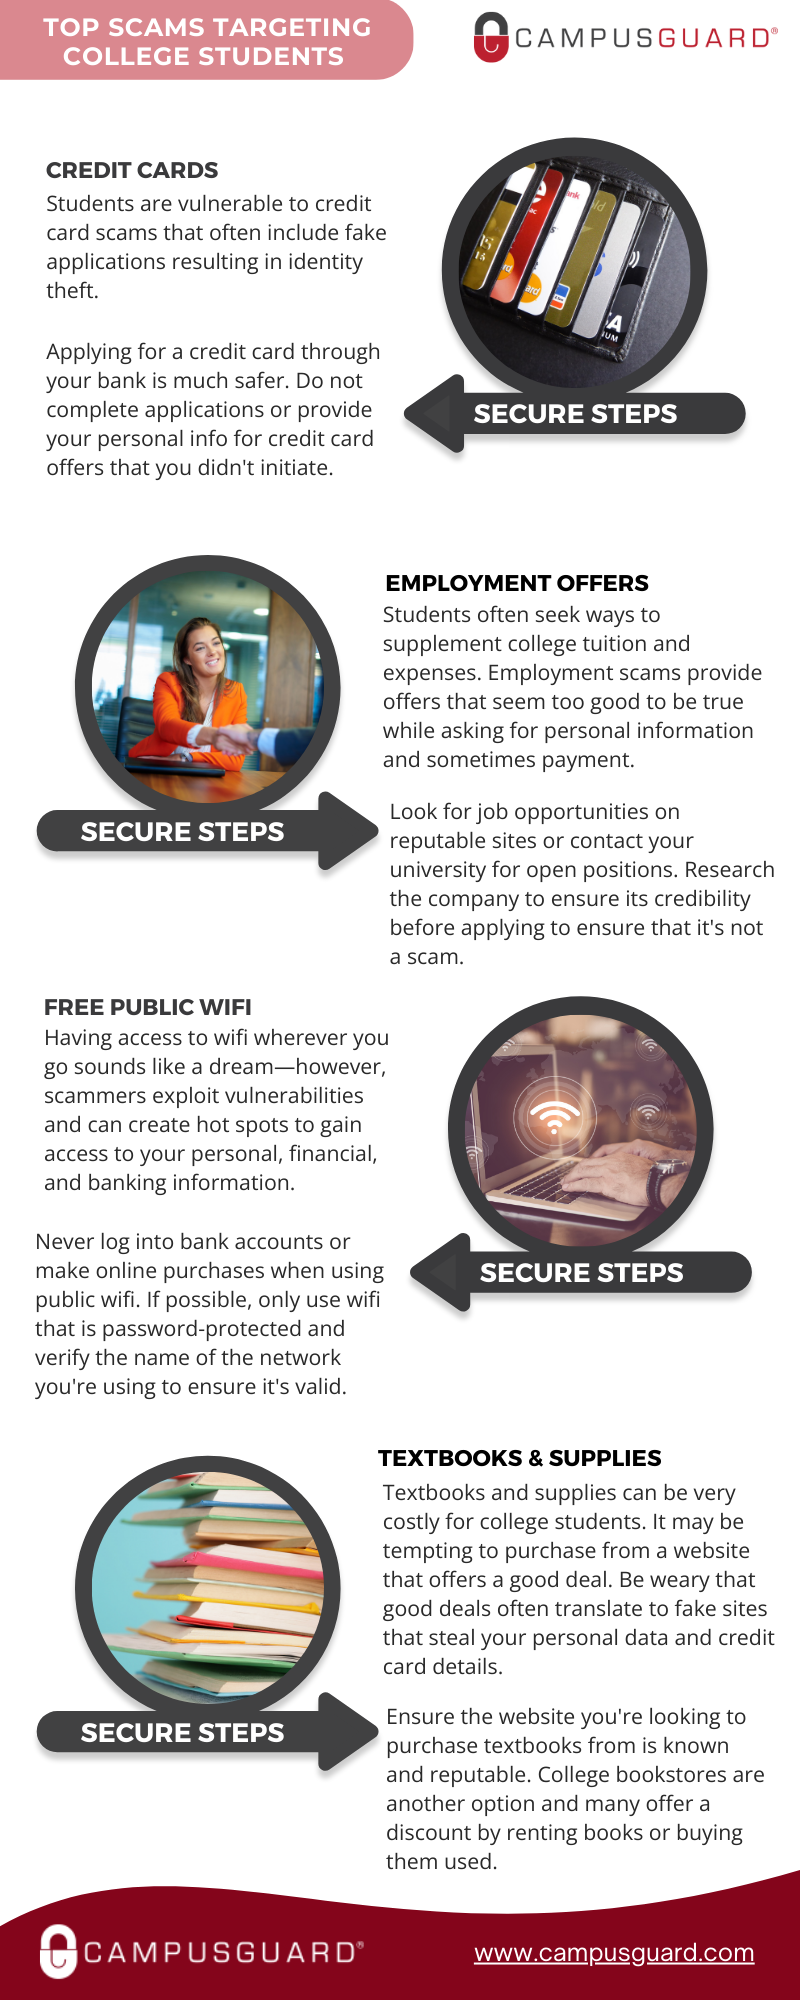 Top scams targeting college students - page 2